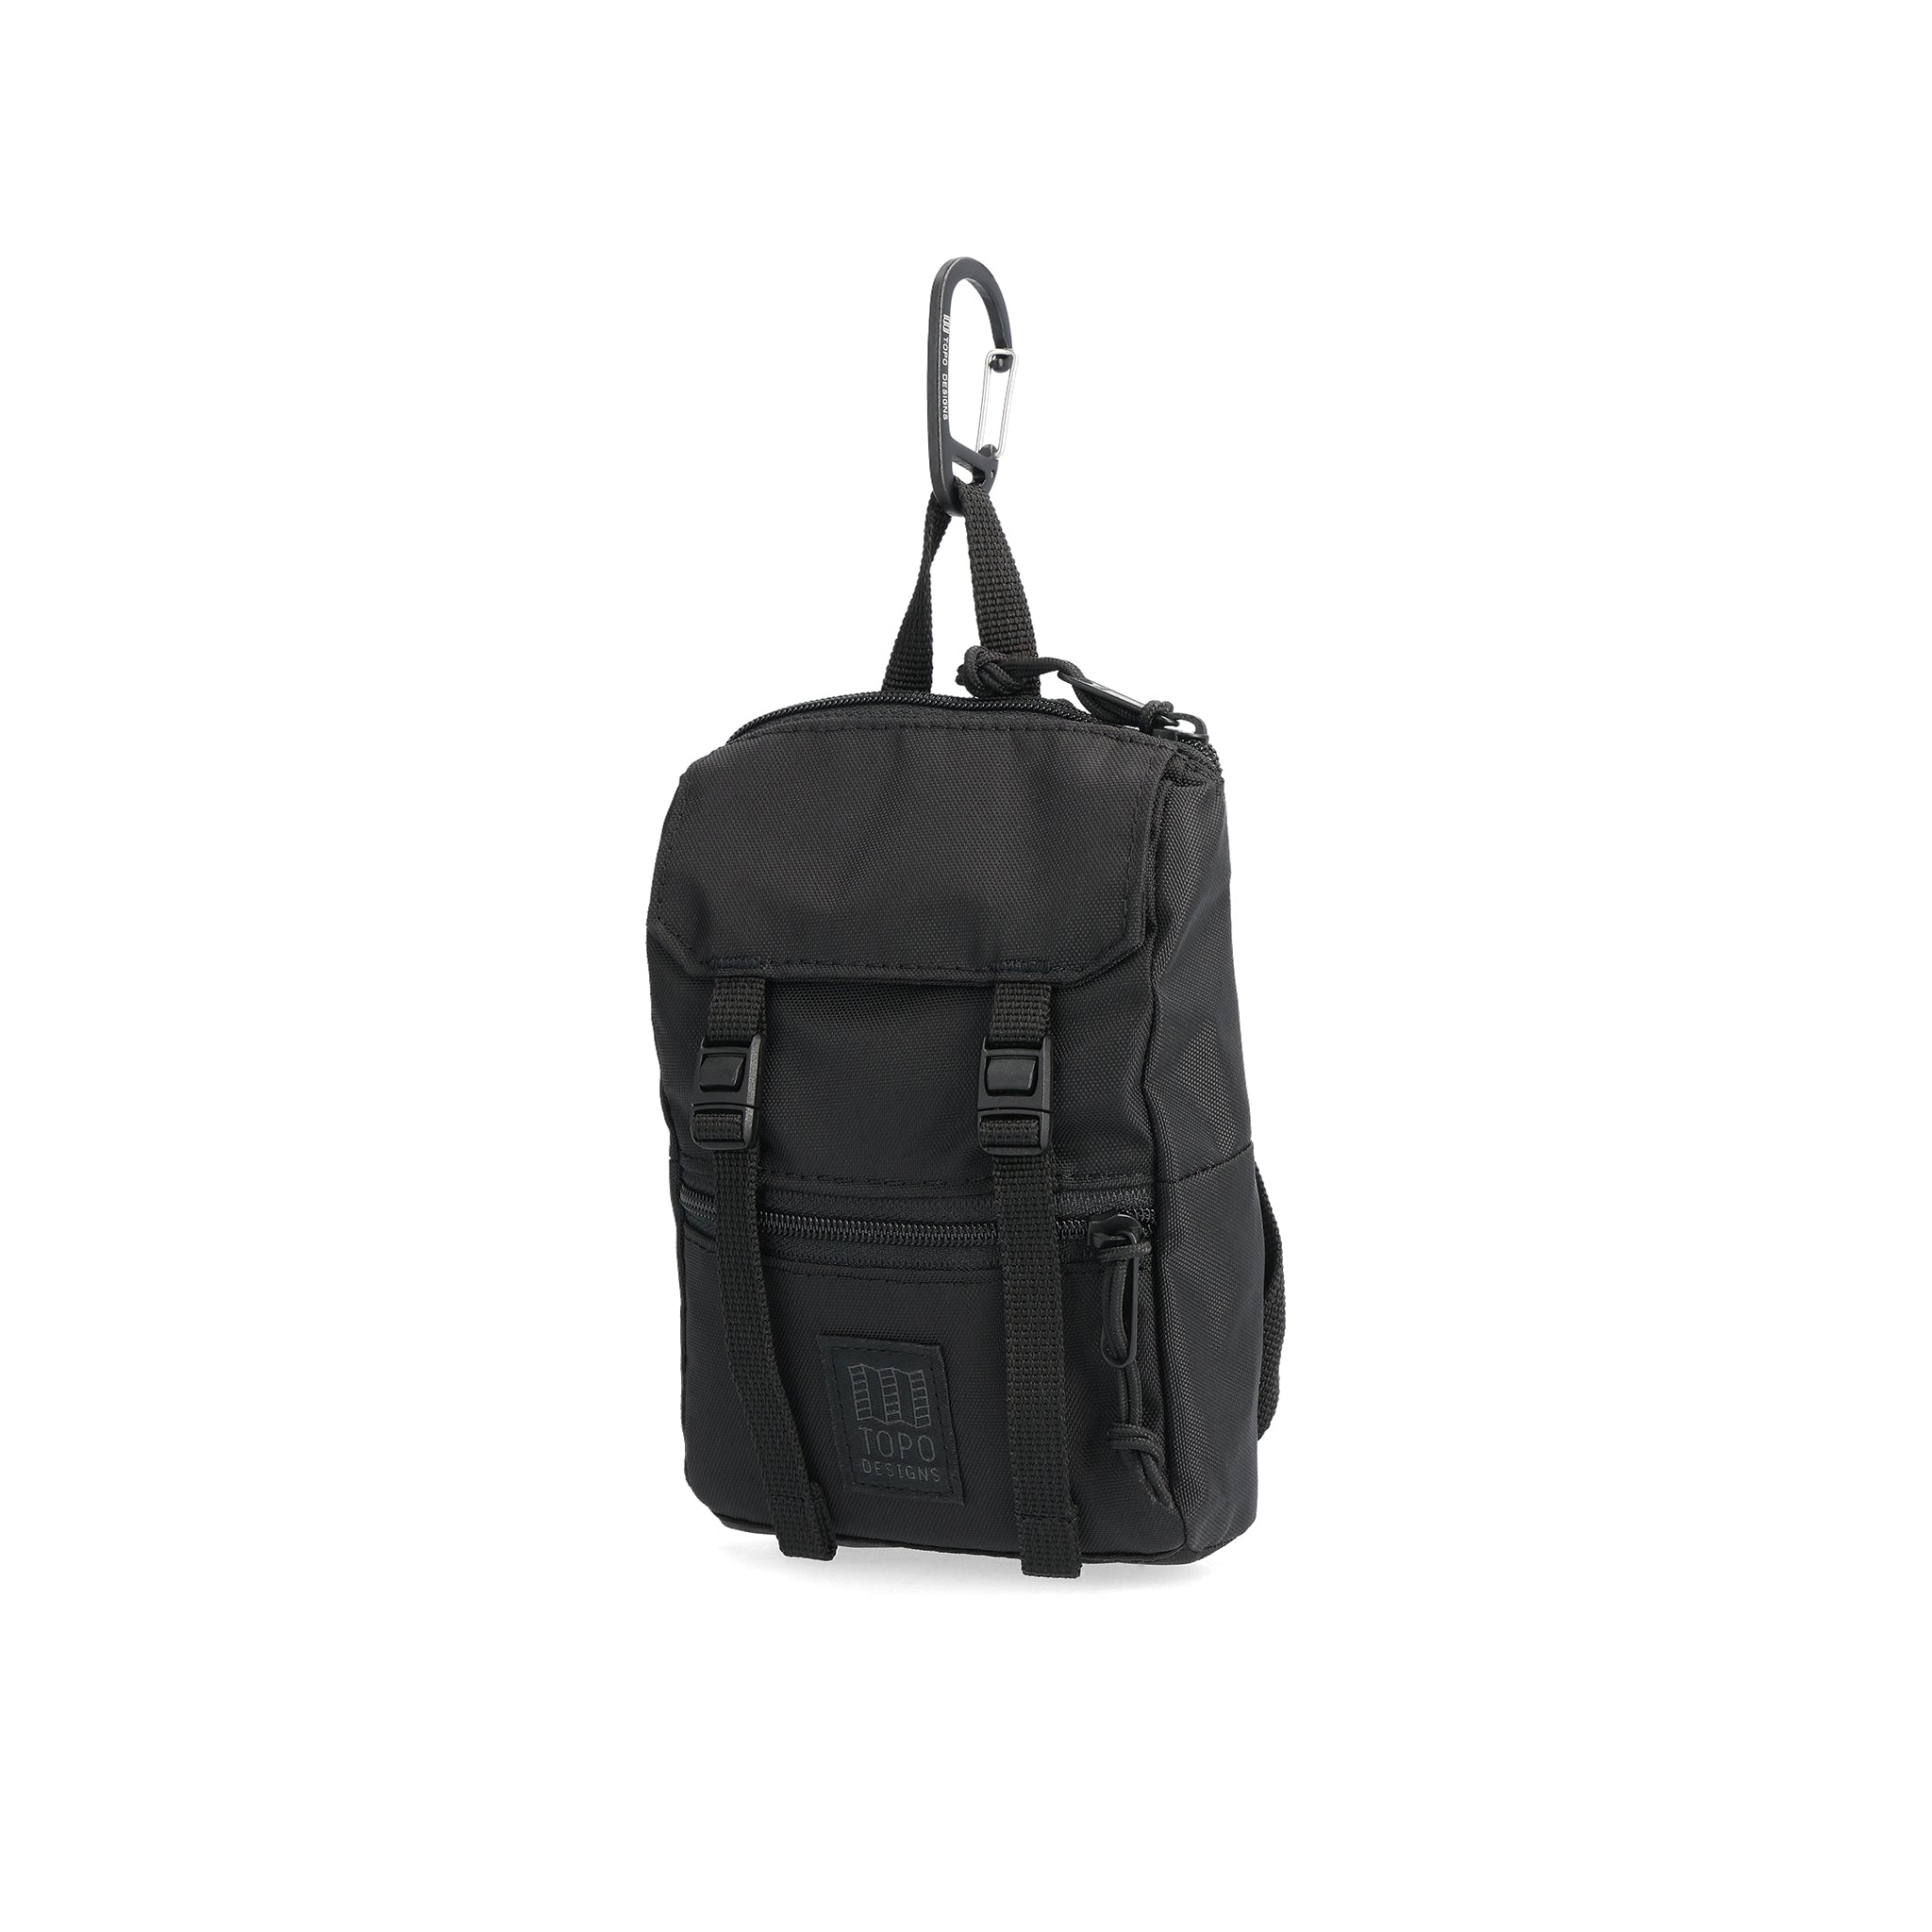 Front View of Topo Designs Rover Pack Micro in "Black"